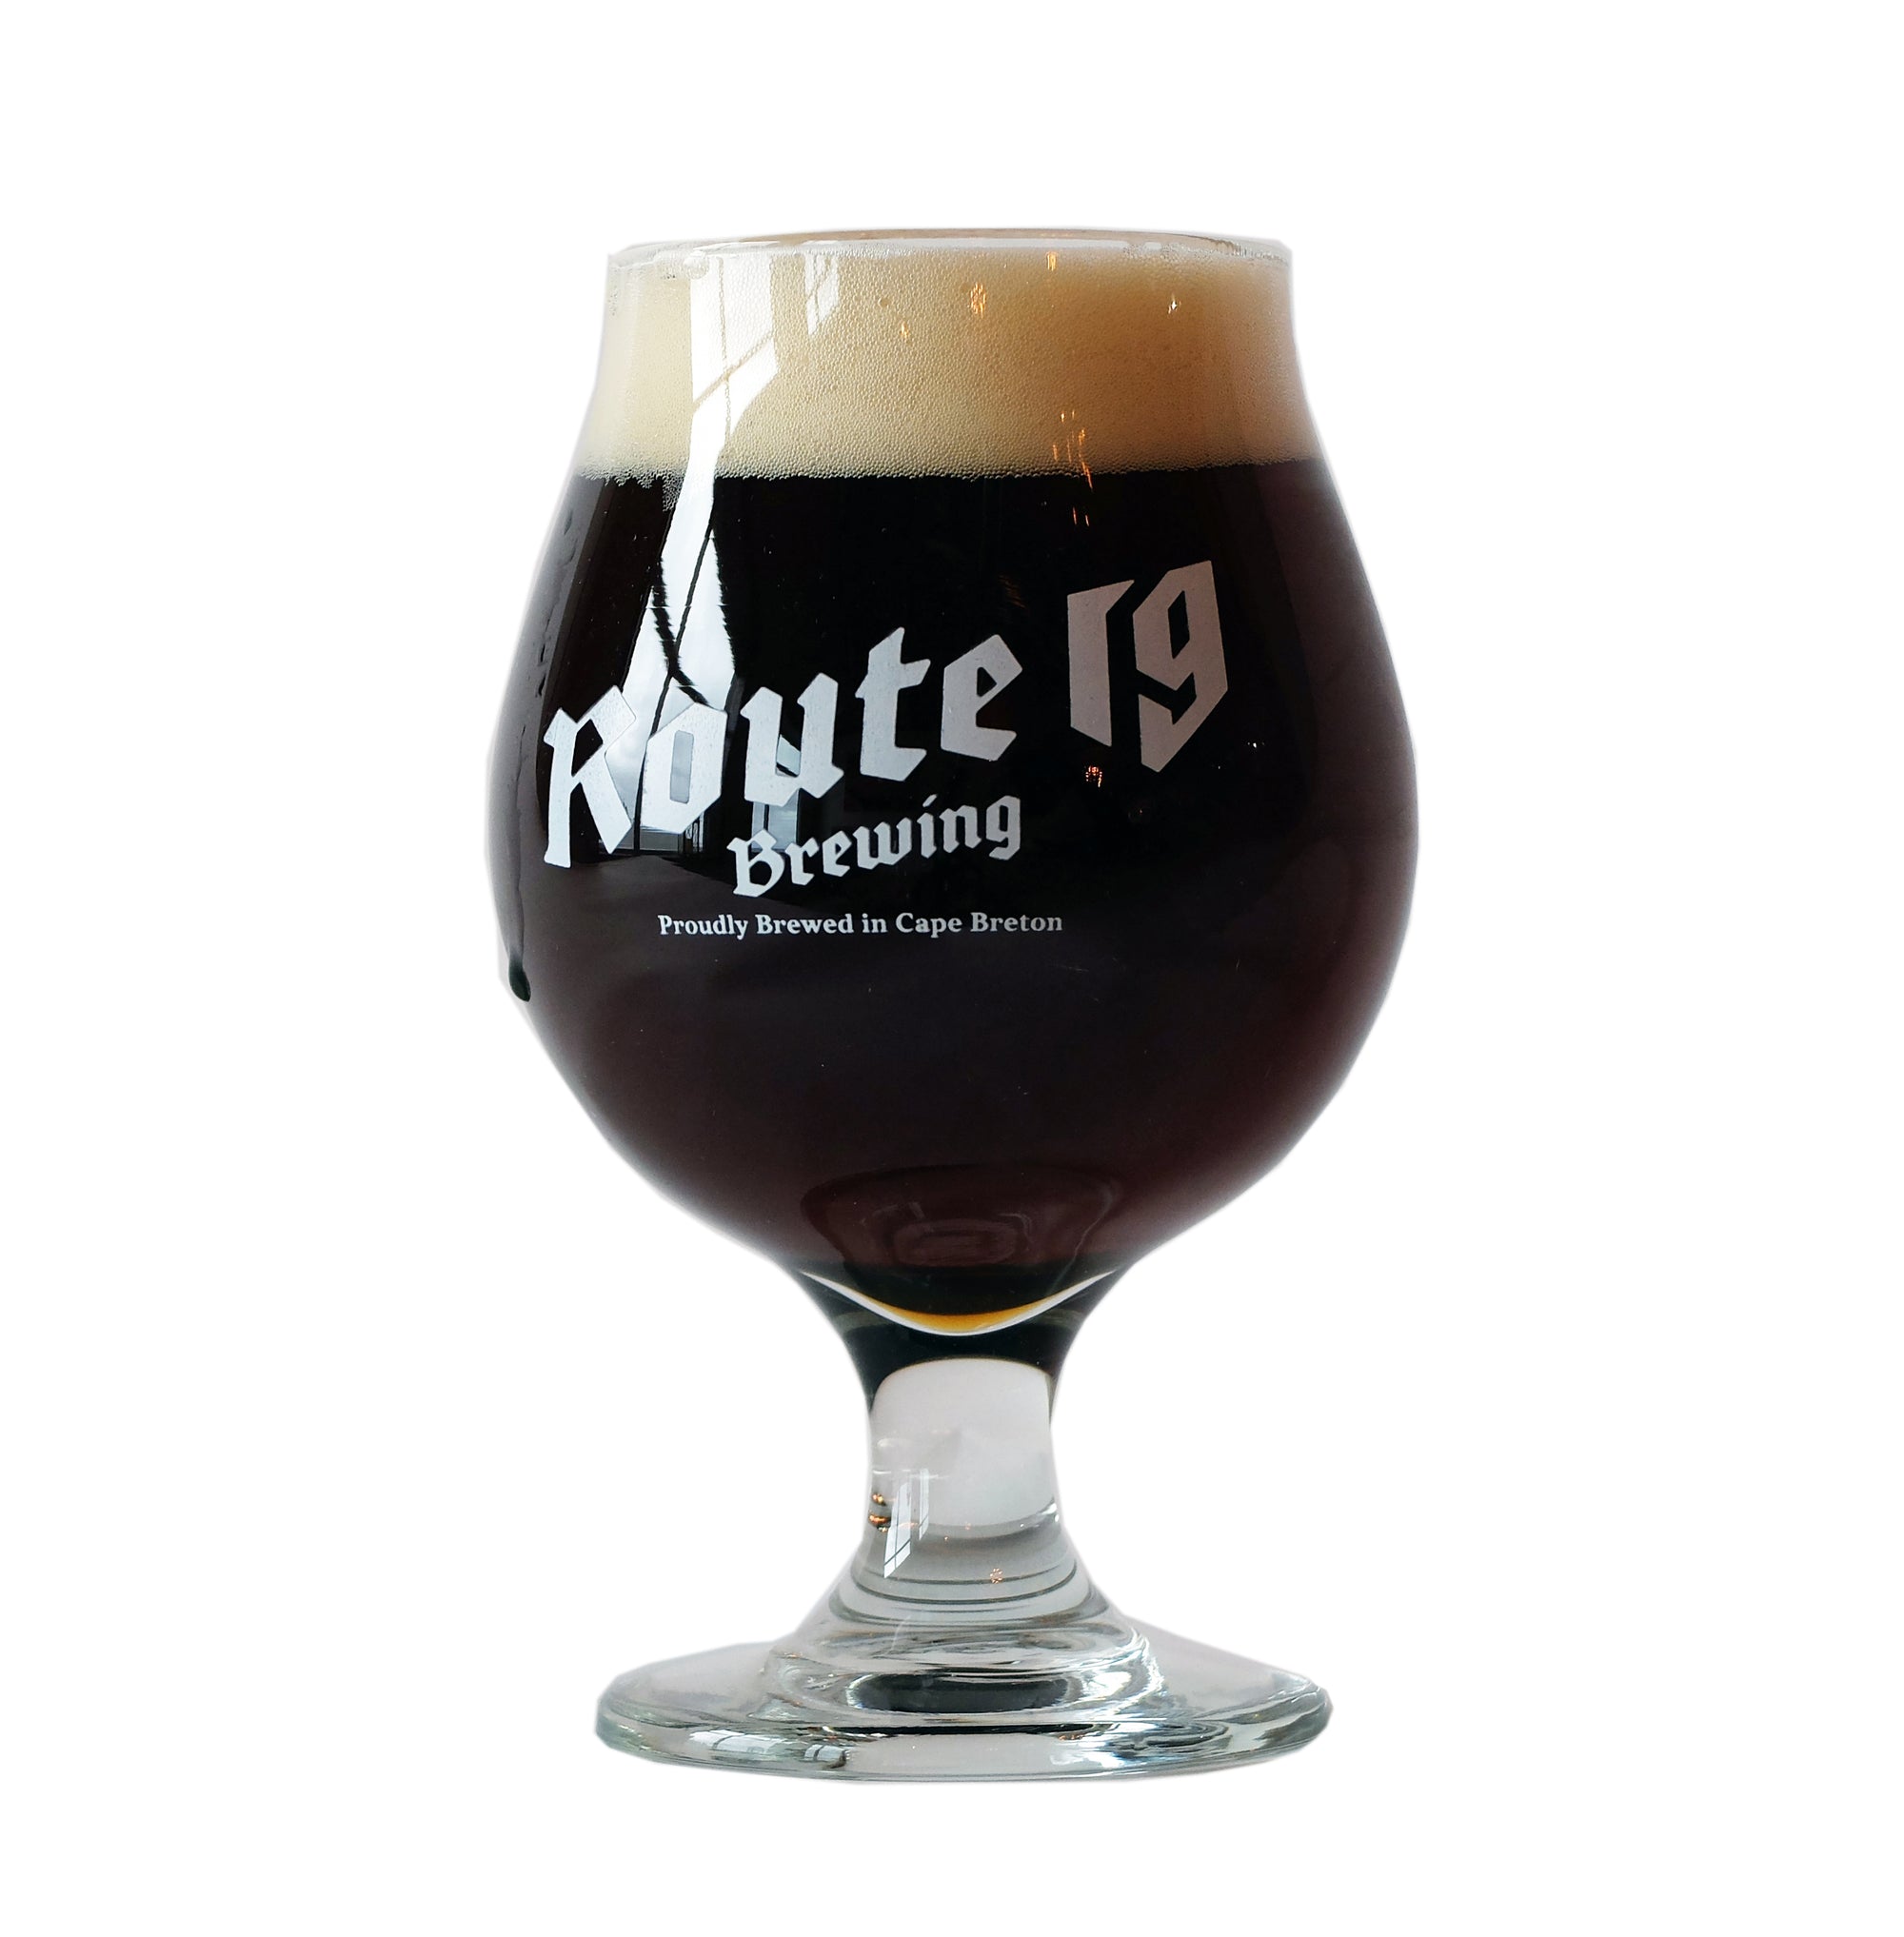 Shop Tagged Glassware - Route 19 Brewing